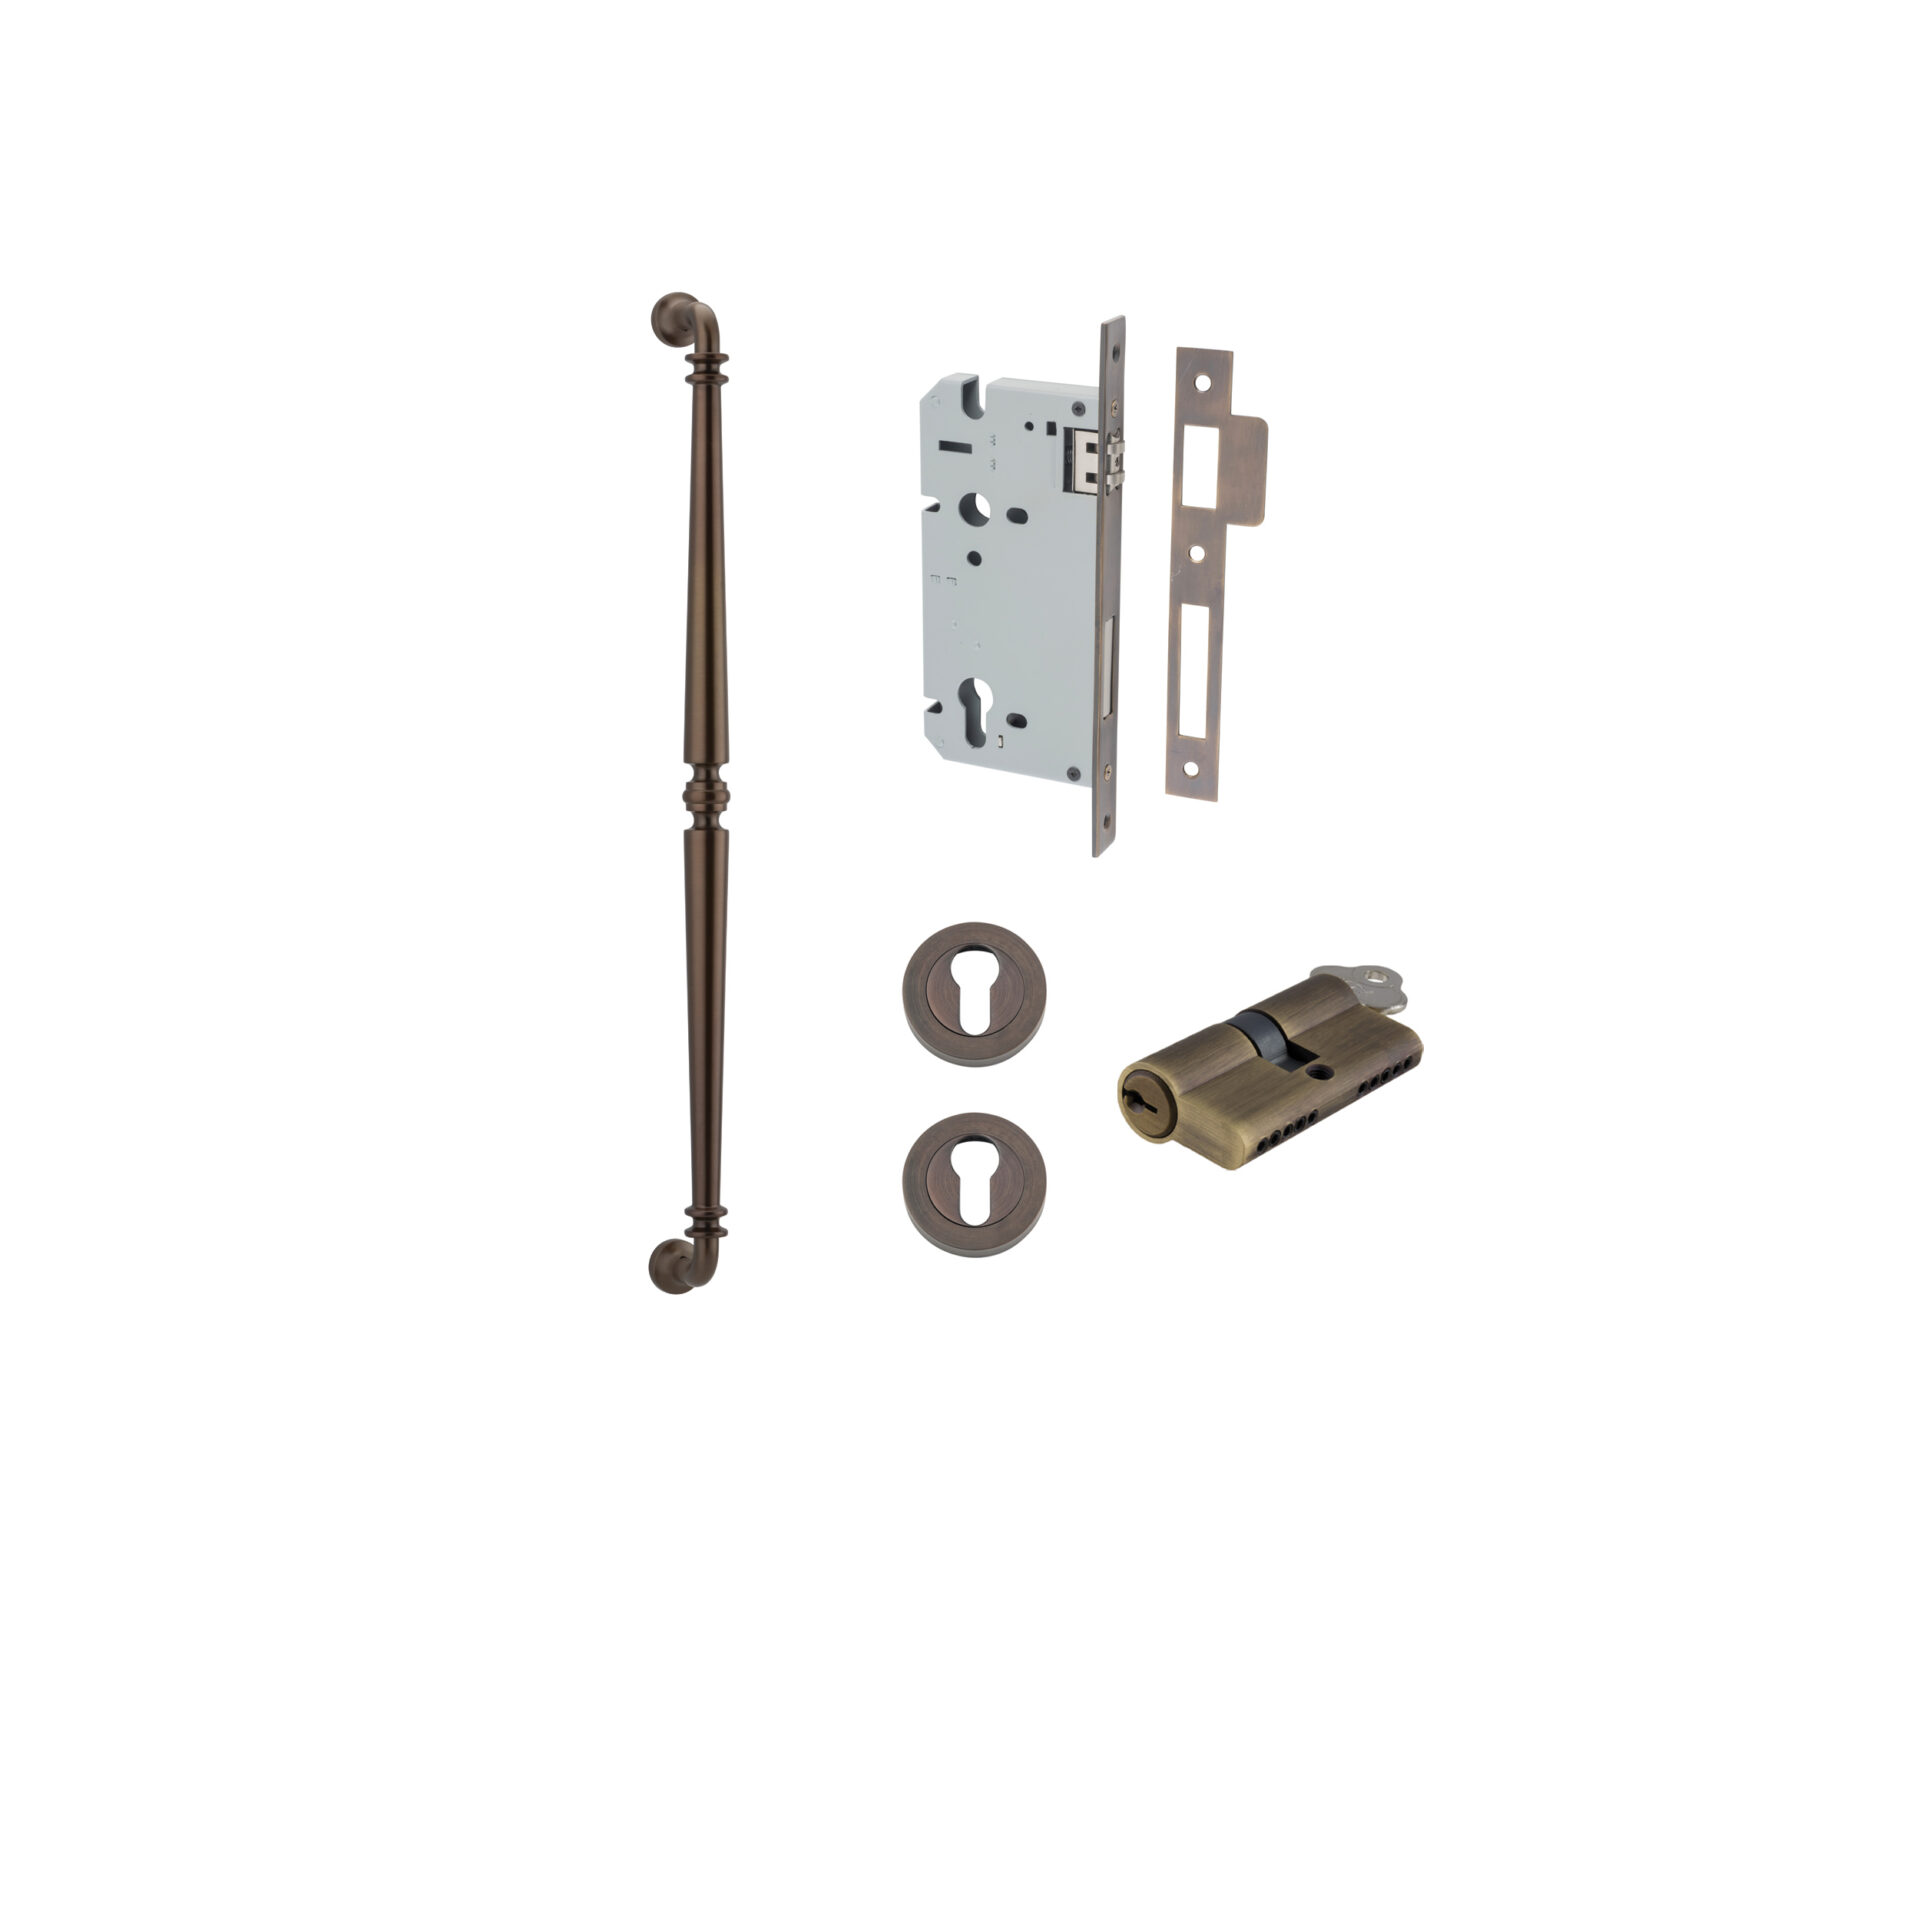 Sarlat Pull Handle - 600mm Entrance Kit with Separate High Security Lock